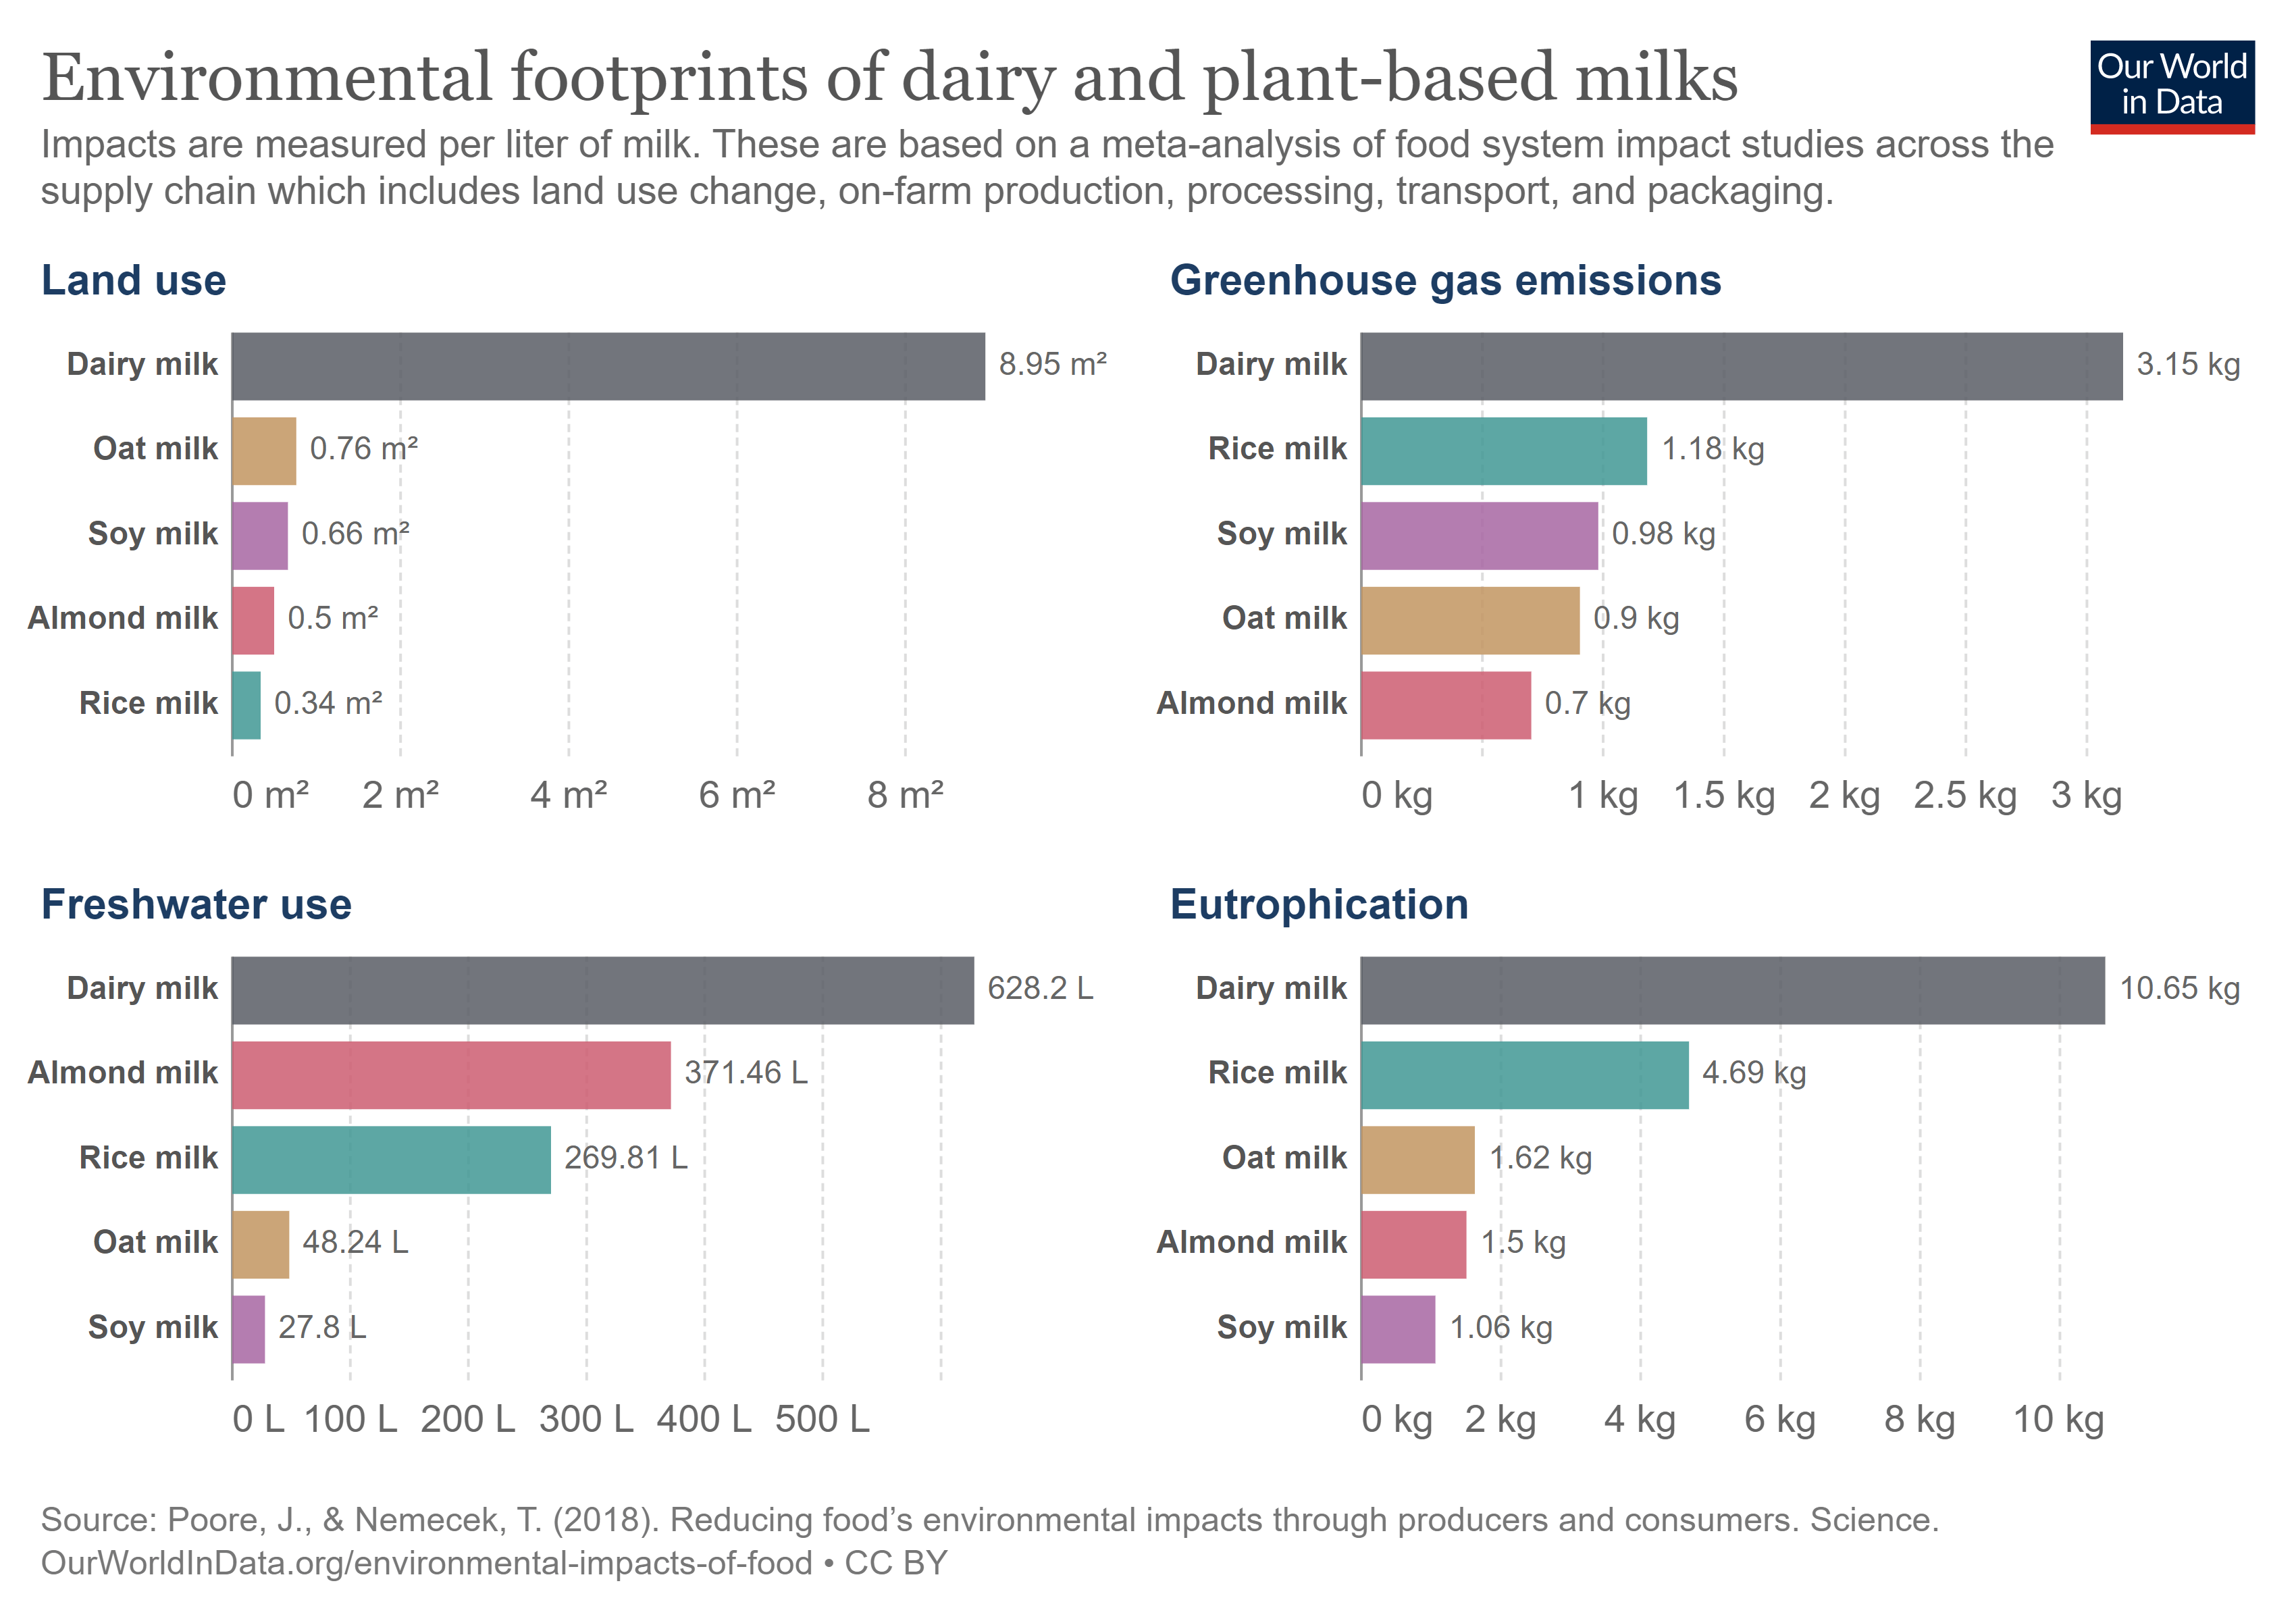 Source: Poore, J., &  Nemecek, T. (2018).  Reducing food's environmental impacts through producers and consumers.  science.  OurWorldInData.org/environmental-impacts-of-food • CC BY